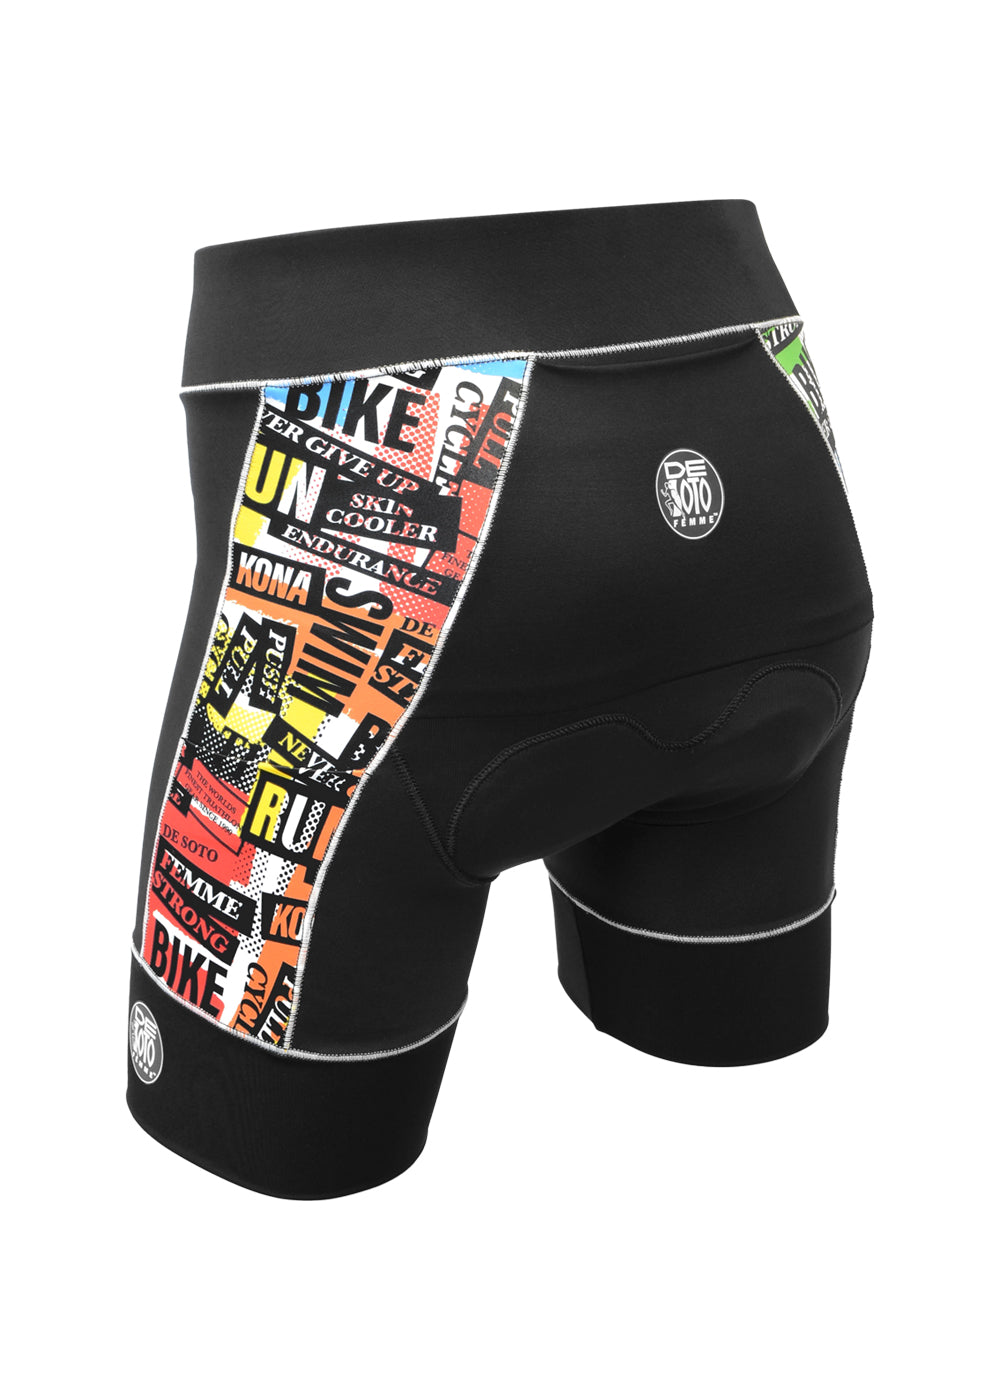 2 In 1 Padded Cycling Shorts Underwear Liner Loose Fit Half Short